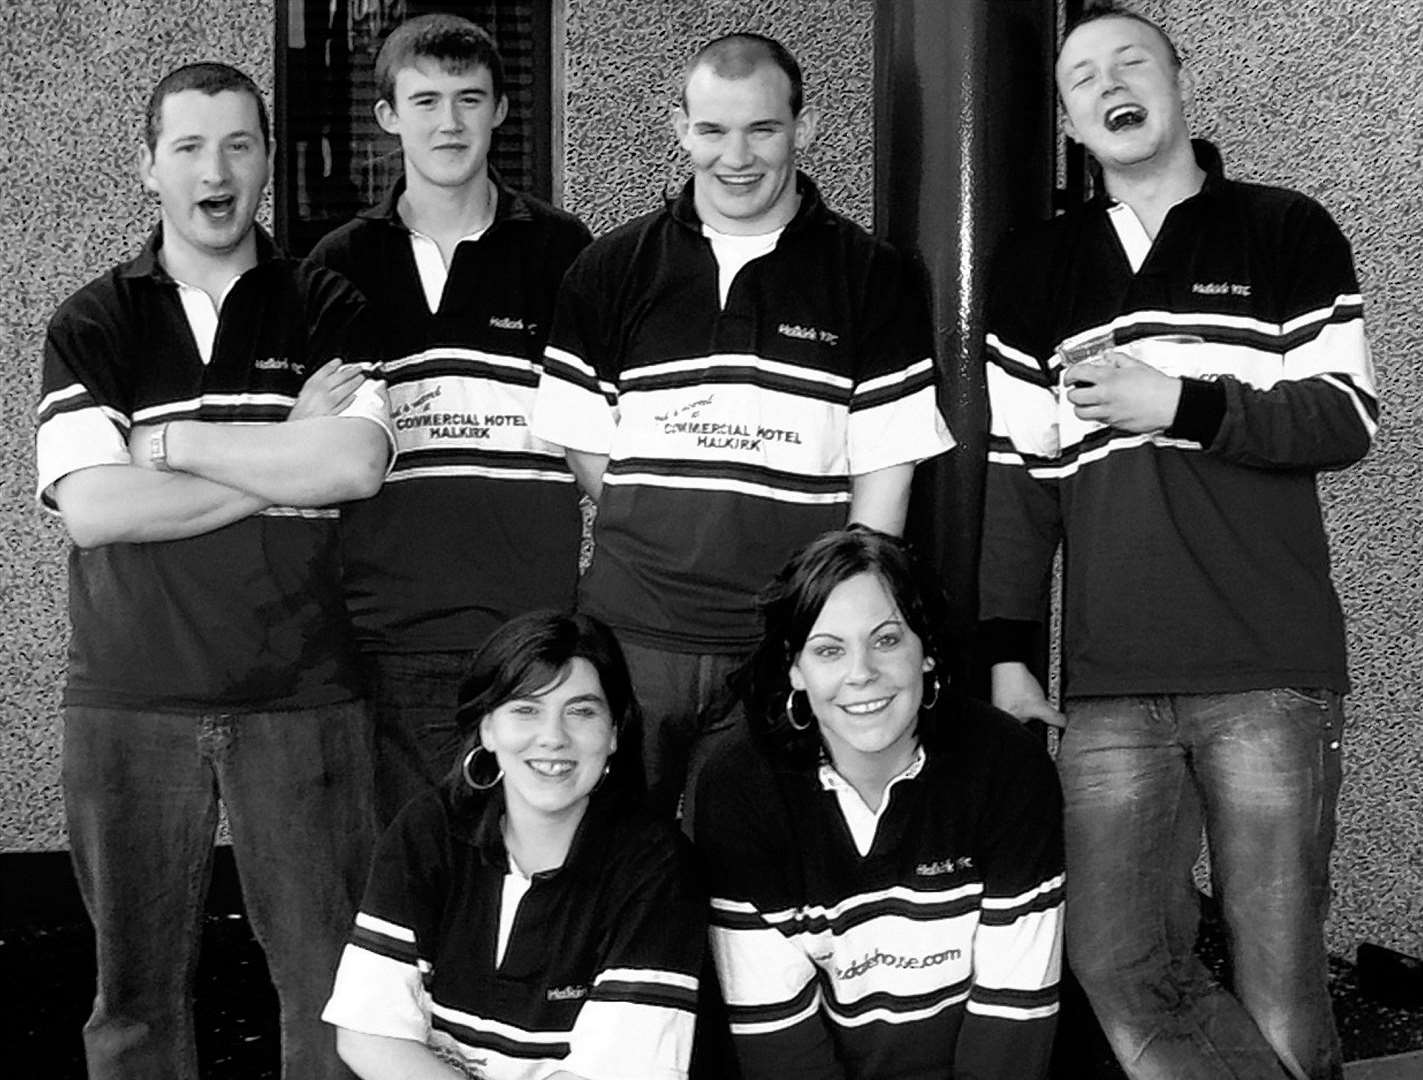 The Halkirk tenpin bowling team at the Young Farmers' national competitions weekend in Thurso in 2007. Back row (from left): Willie Budge, John Coghill, Bryan Sinclair and Jamie Riddell. Front: Carol-Ann Budge and Ellen Falconer.